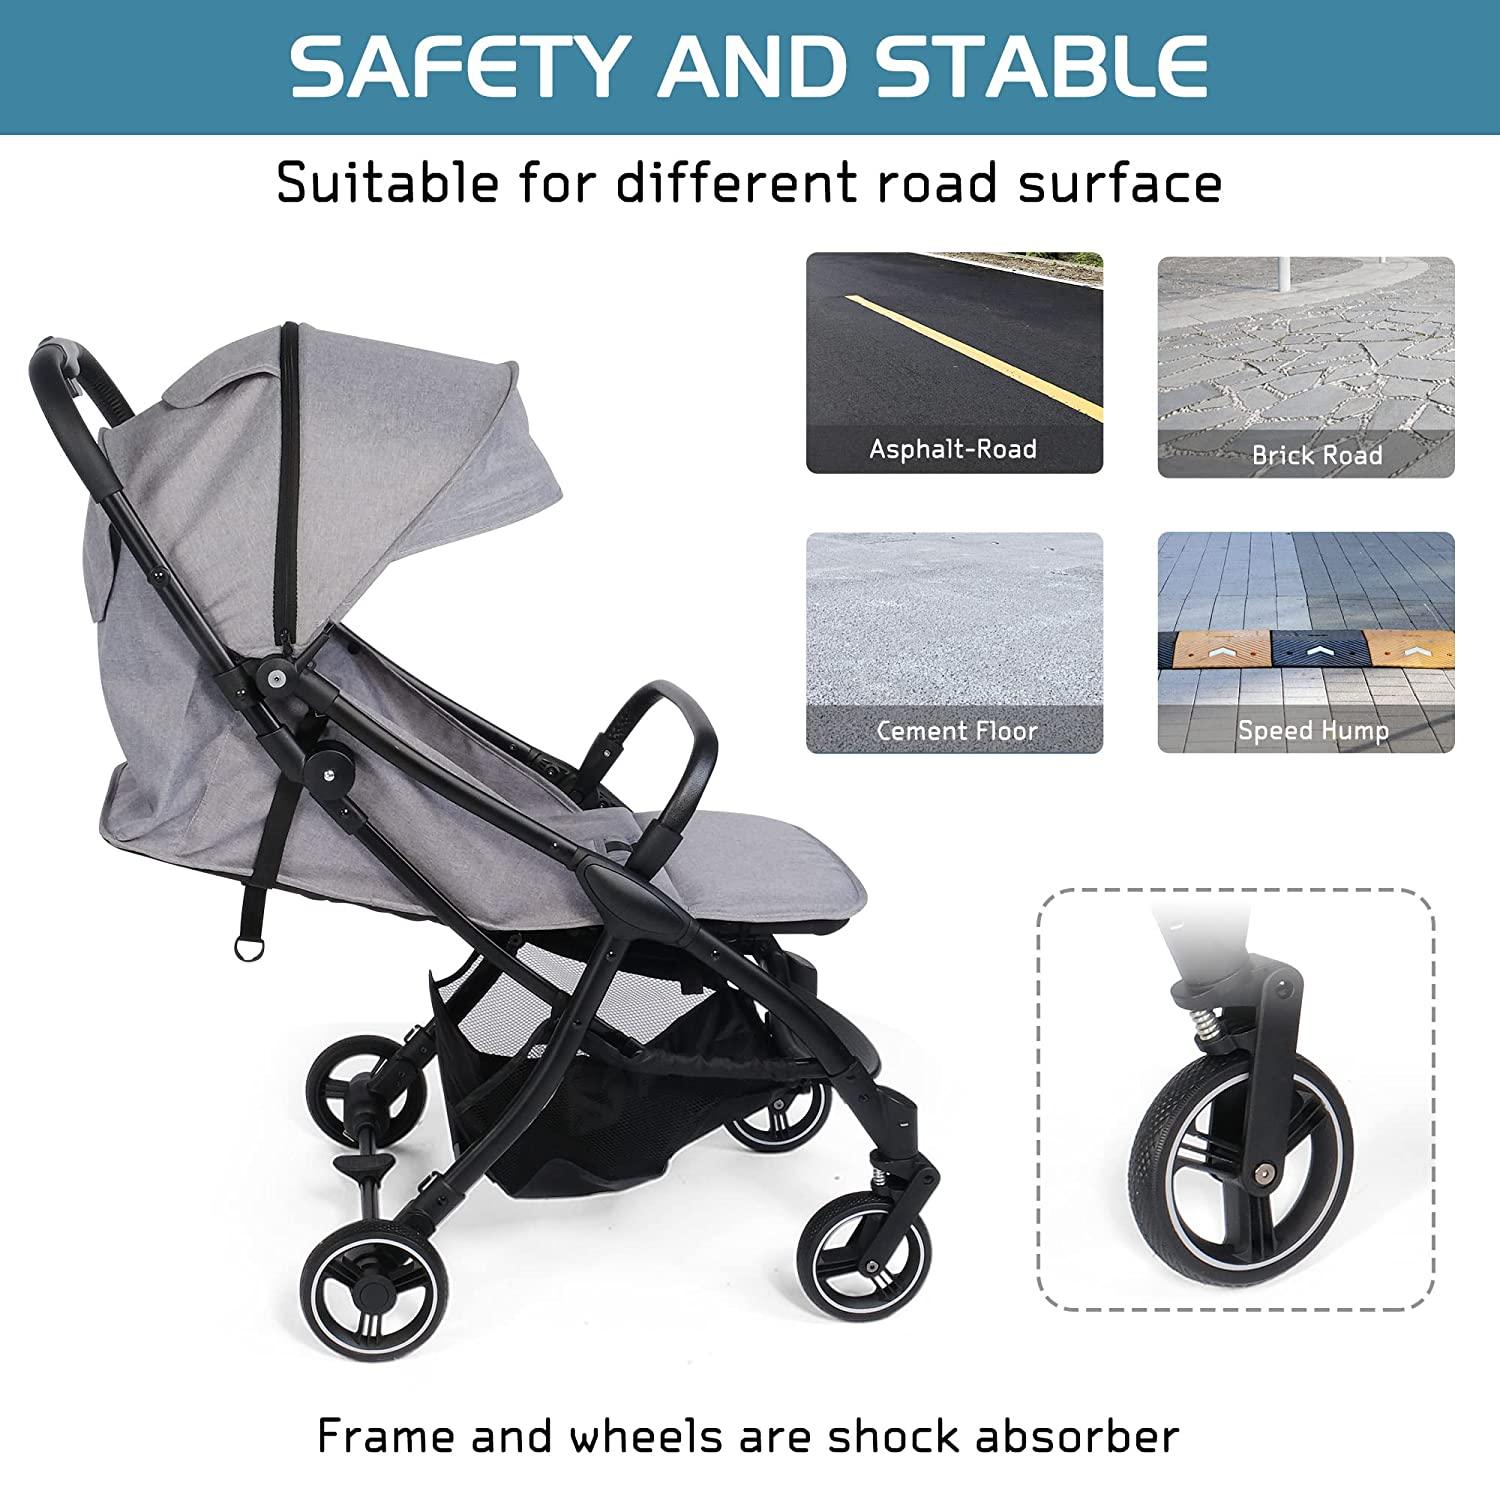 Baby Stroller All-Terrain Lightweight Foldable Compact Pushchair for Outdoor Travel - with Adjustable Canopy, Reclining Seat, Grey - Bosonshop